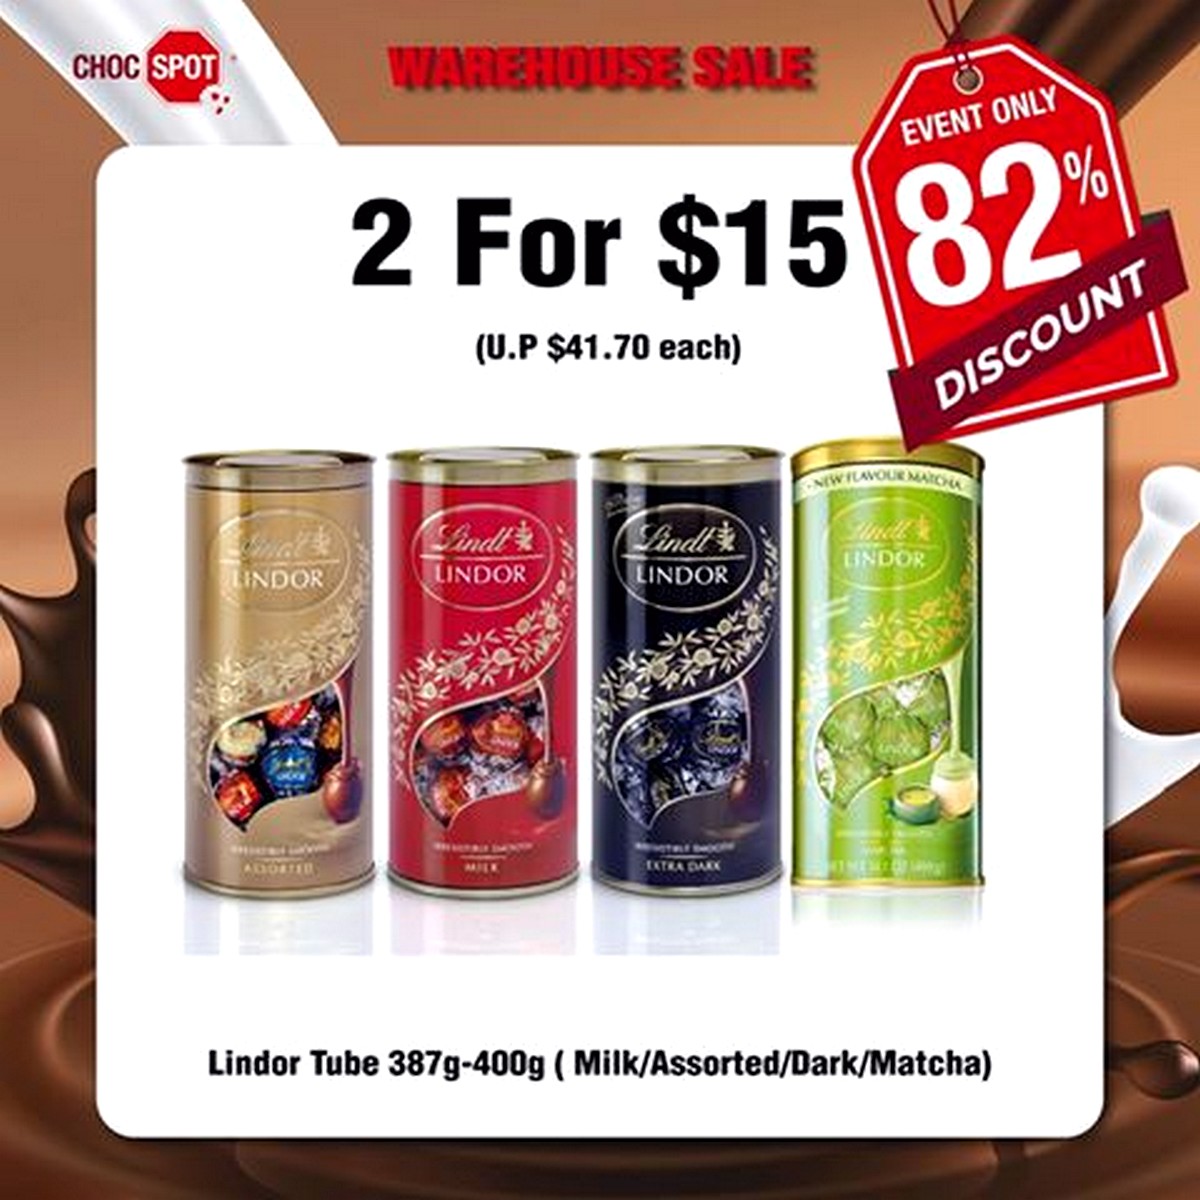 Choc-Spot-Warehouse-Sale-Highlights-007 24 Jul-2 Aug 2020: Choc Spot Warehouse Sale! Up to 80% off Chocolates, Sweets, Chips, Biscuits!